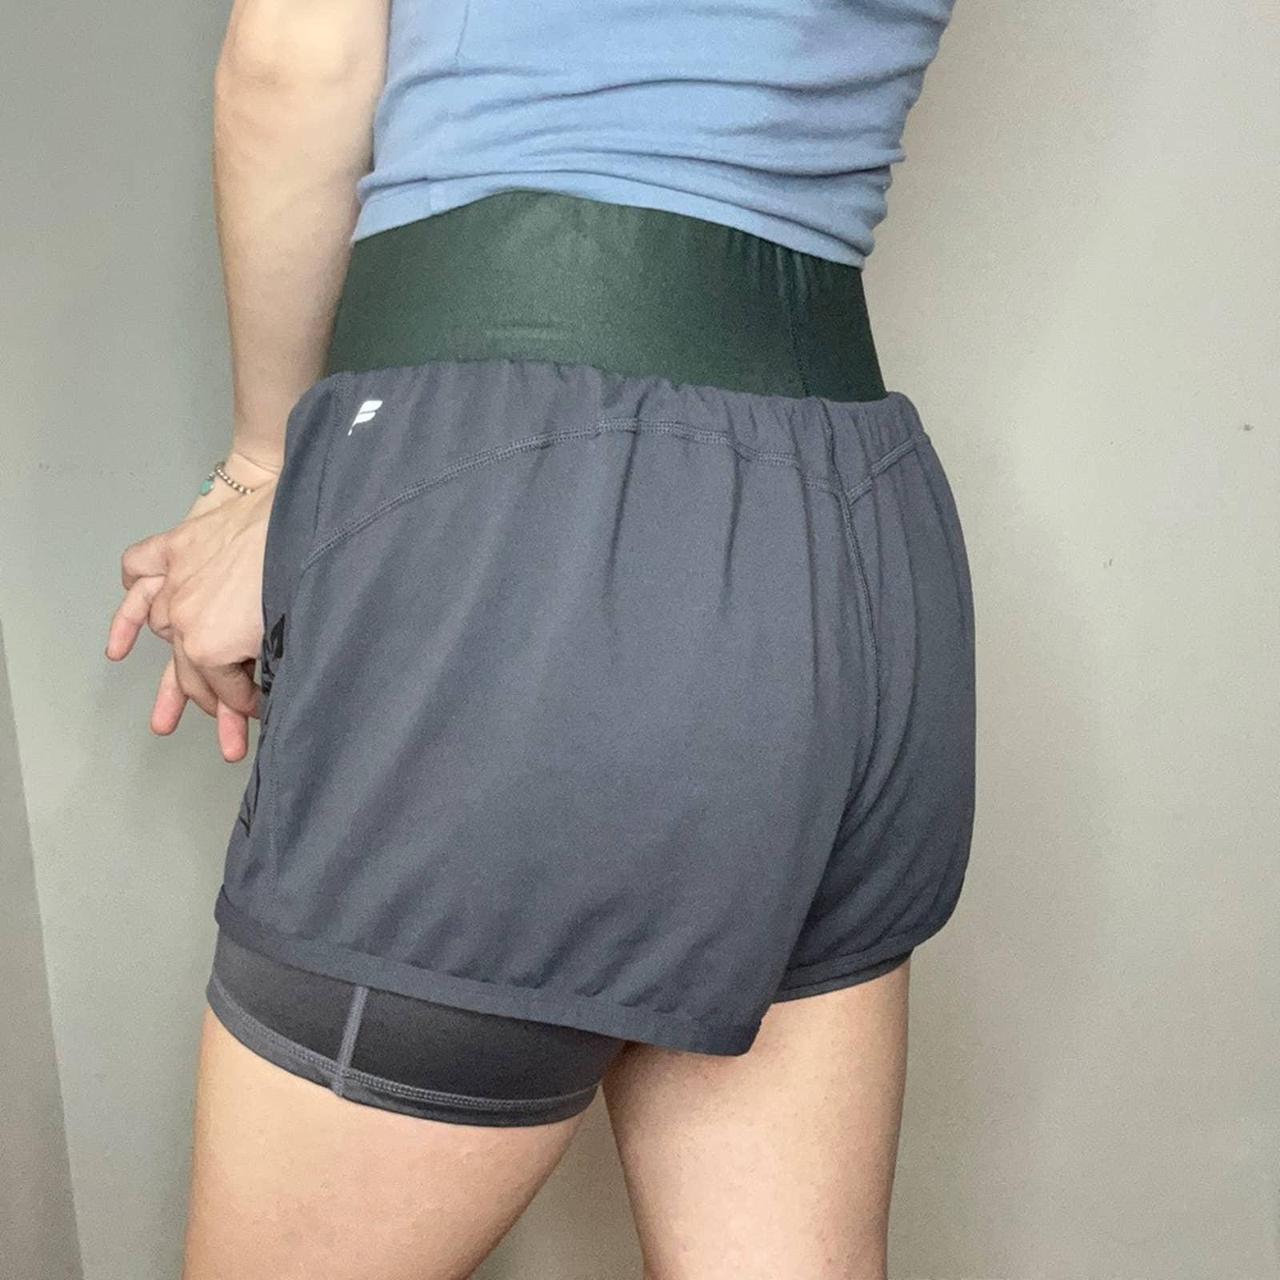 Fabletics Women's Grey and Black Shorts (2)